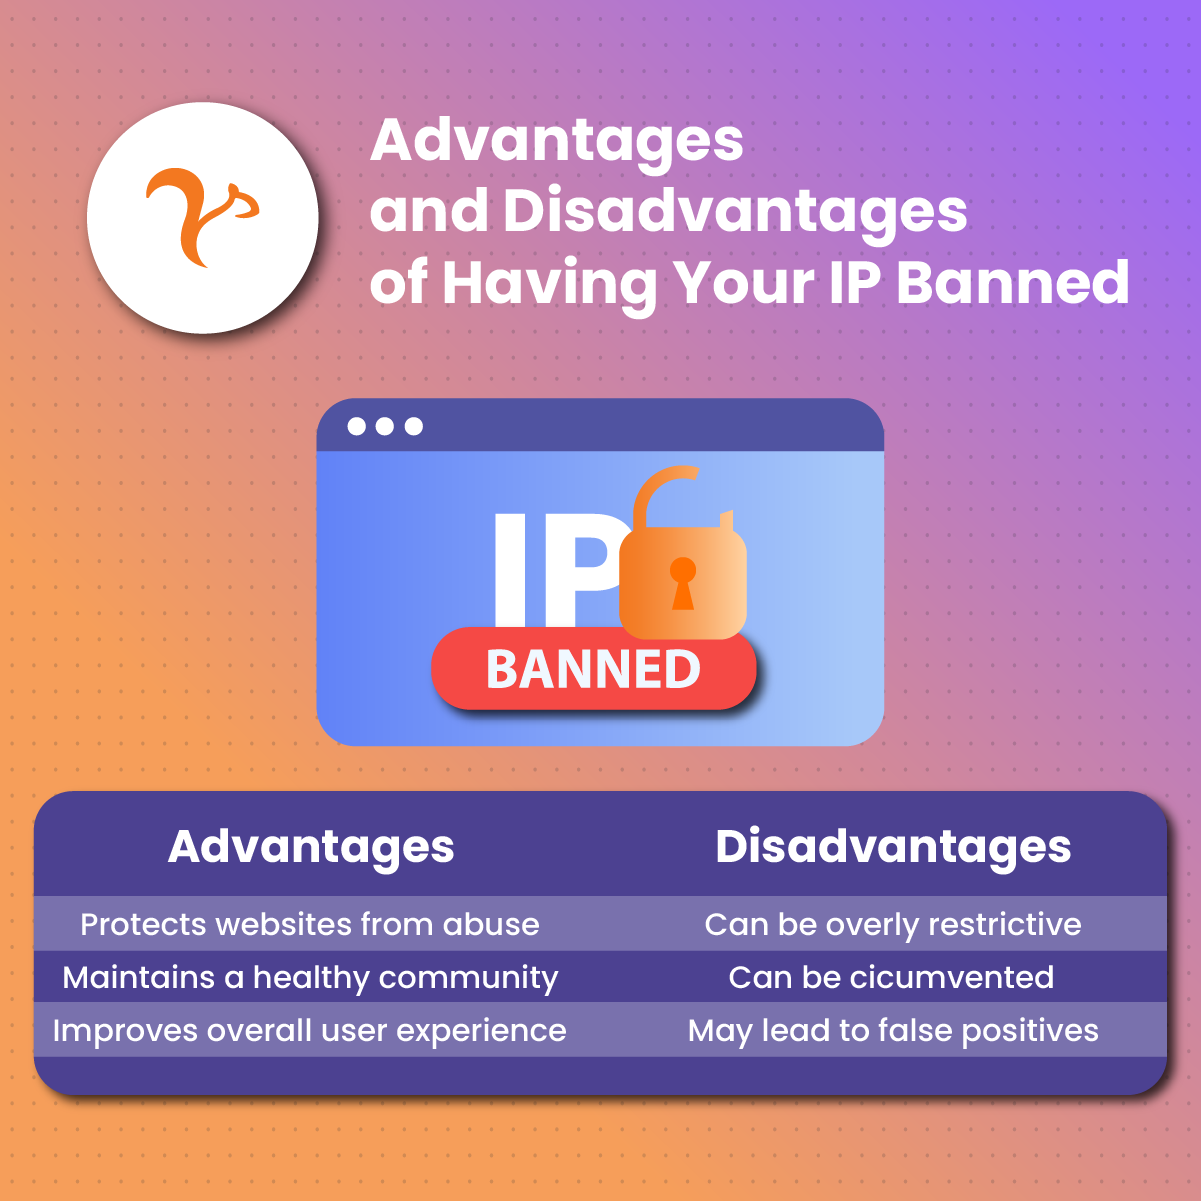 Advantages and Disadvantages of Having Your IP Banned